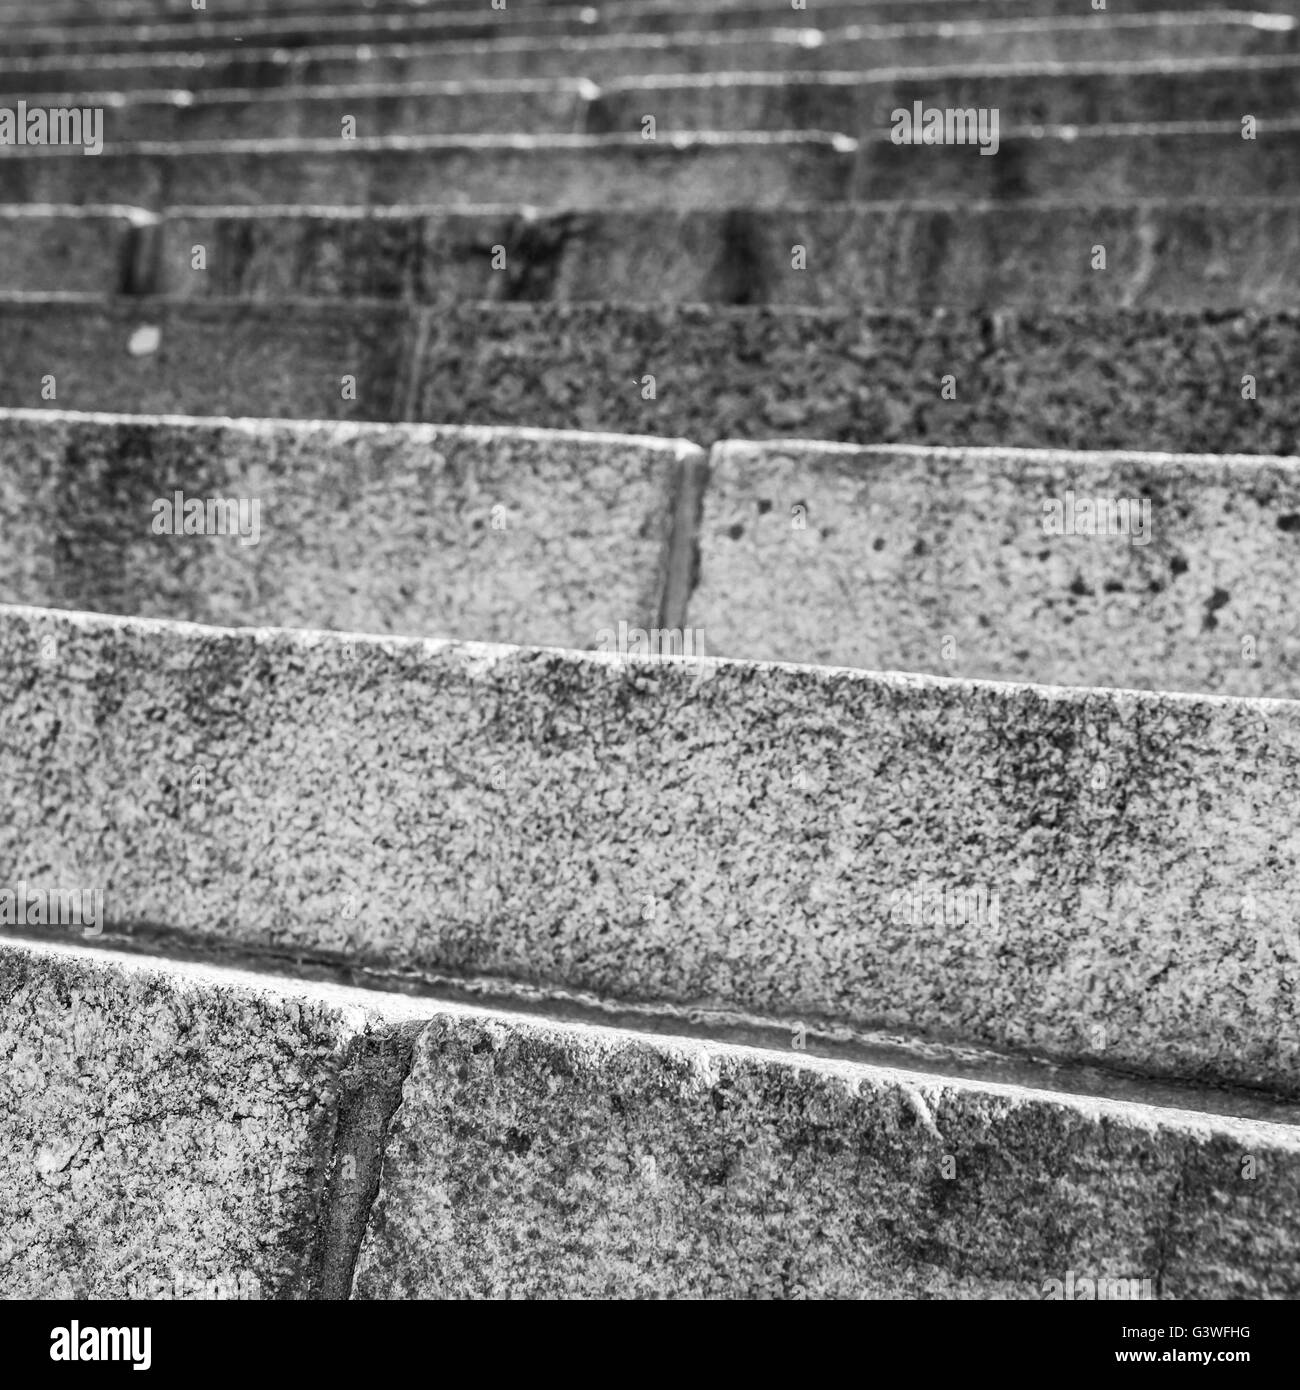 Abstract architecture fragment. Old stairway made of gray granite stone blocks, square close-up photo with selective focus Stock Photo